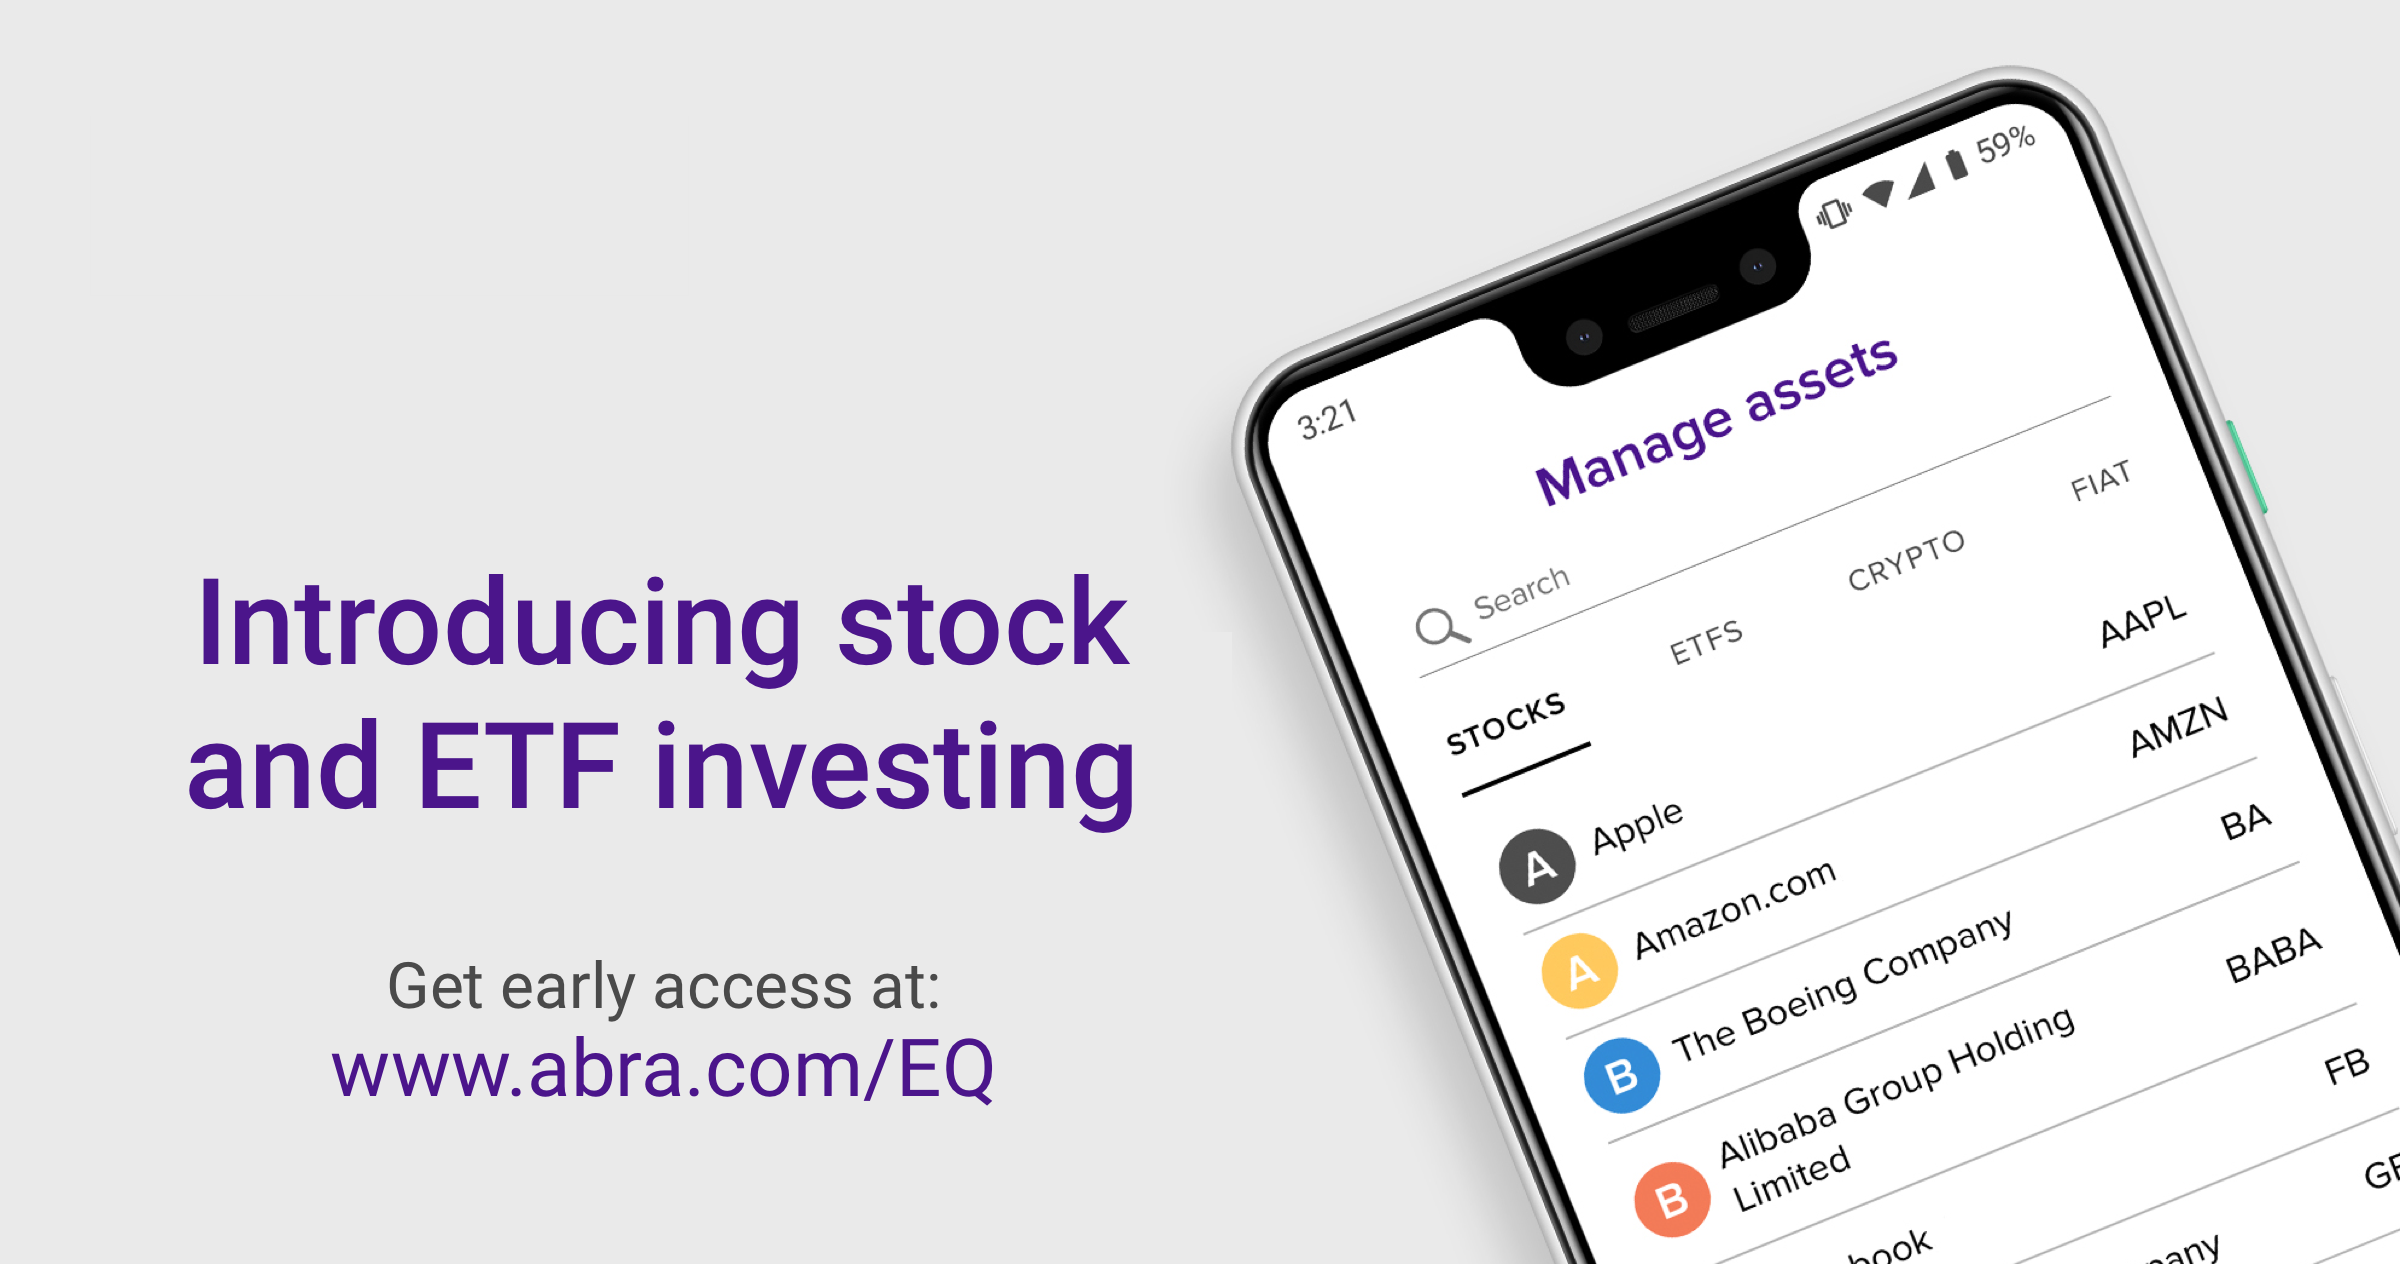 stock and ETF investing on Abra